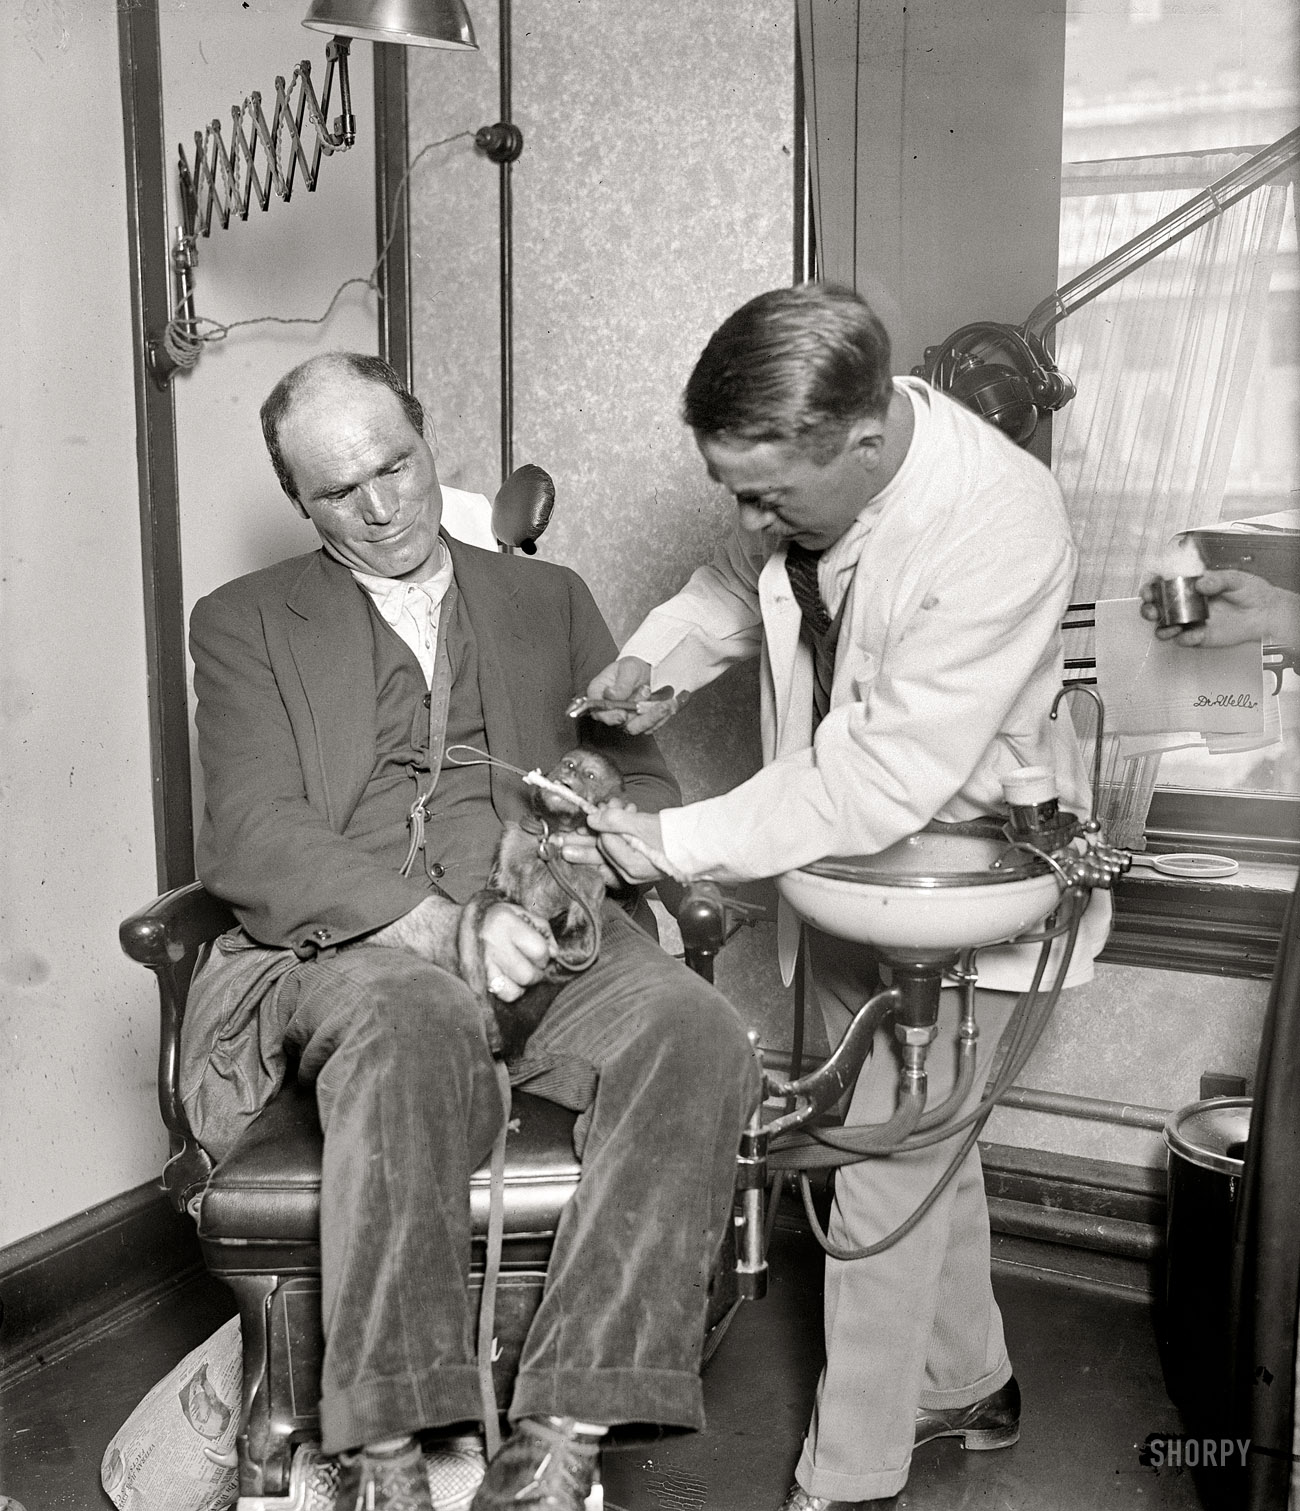 May 29, 1924. Washington, D.C. "Pulling monkey teeth." The dentist seems to be one Dr. Wells. National Photo Co. Collection glass negative. View full size.